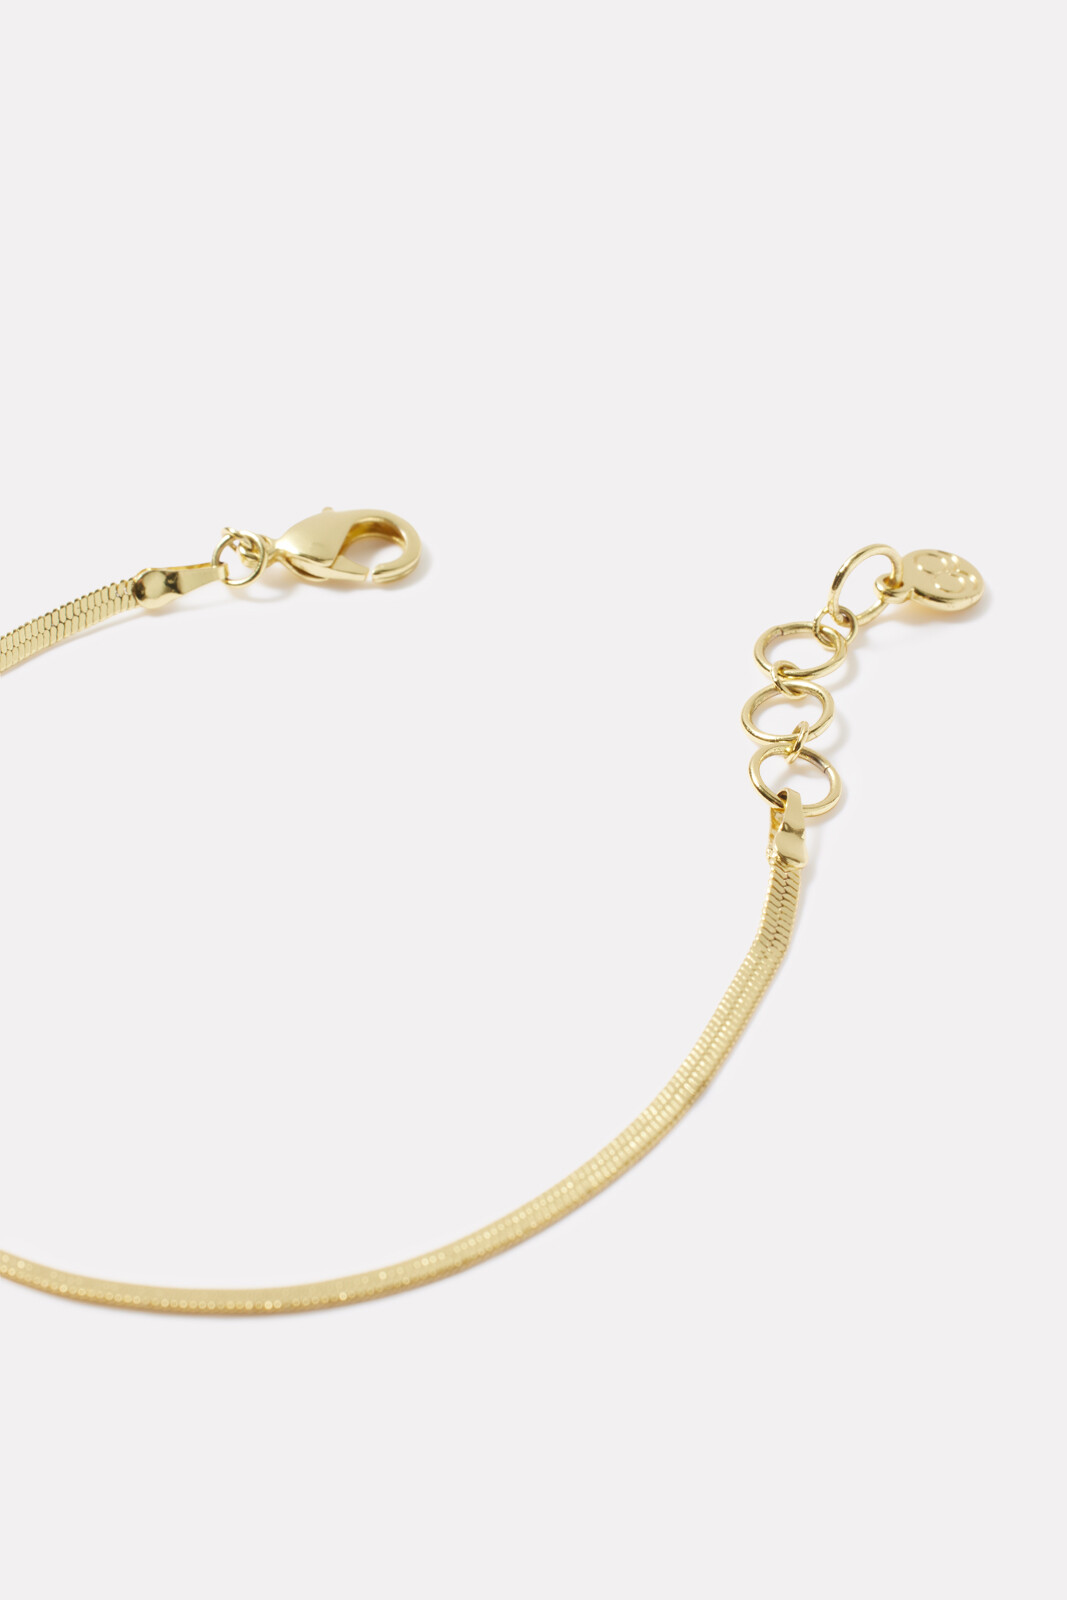 Gorjana Venice Necklace in Gold | The Paper Store